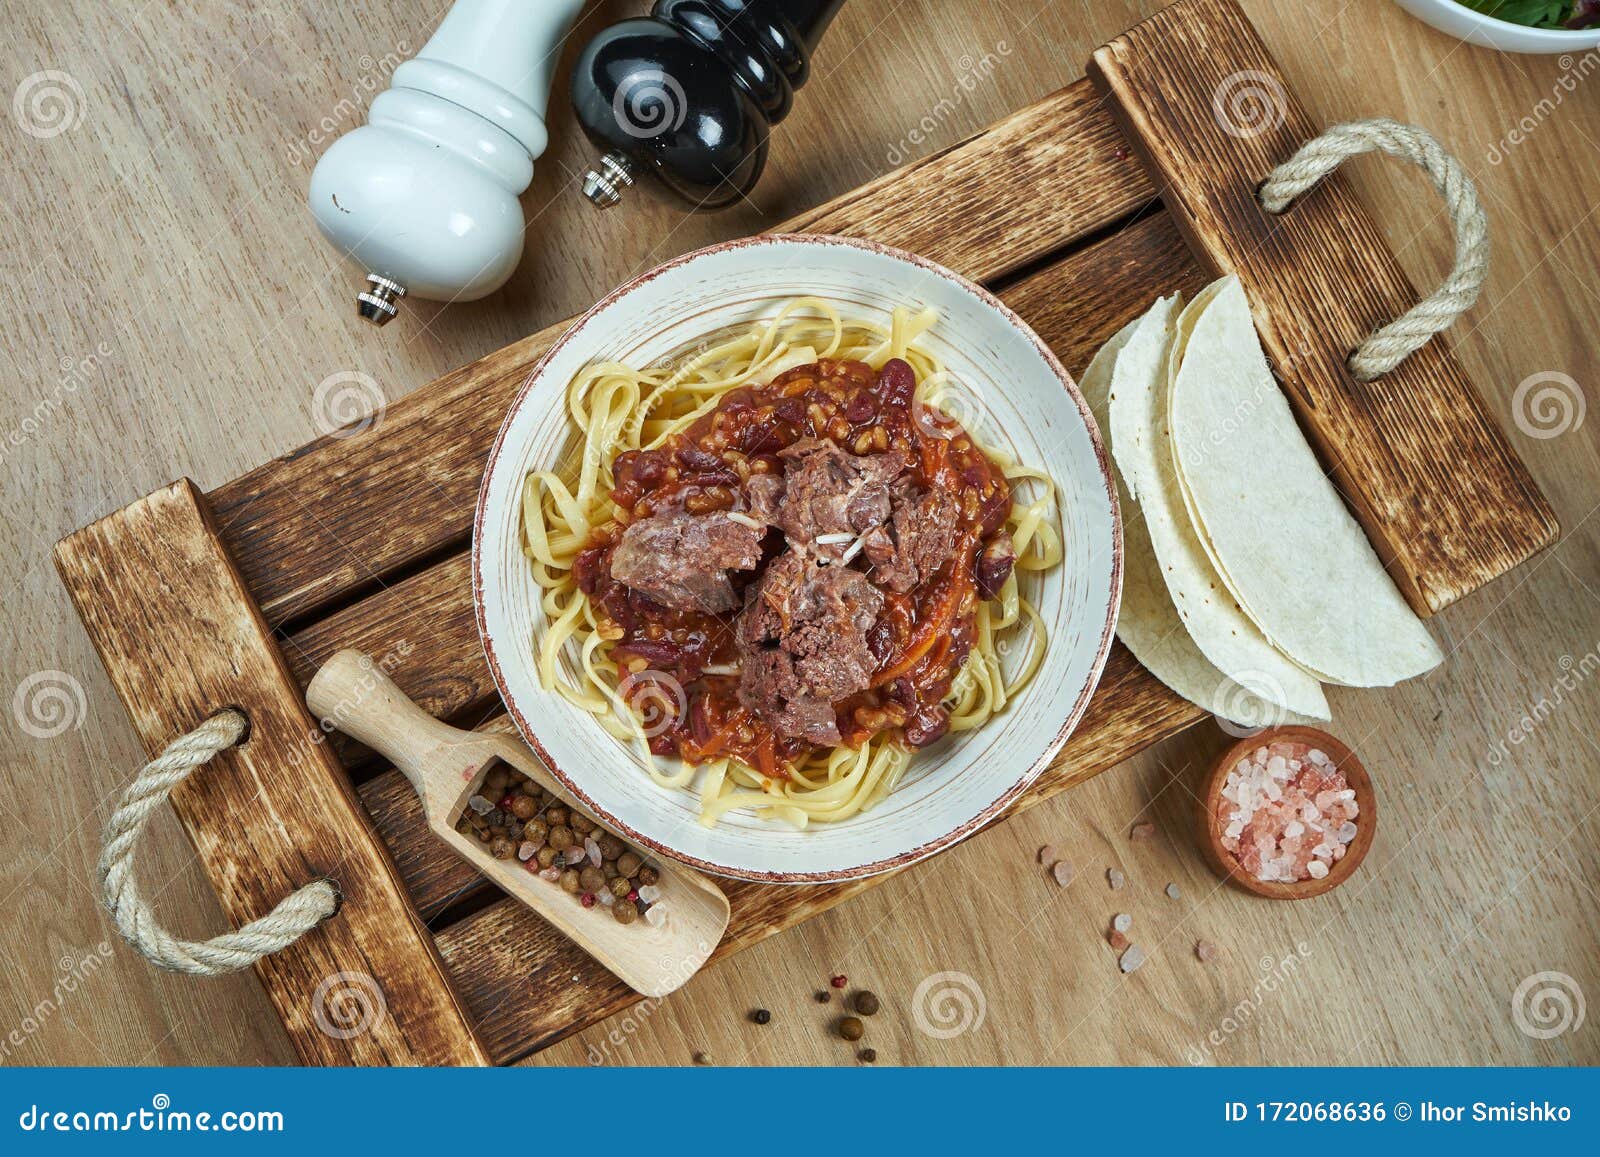 Mexican Style Noodles Corn Paste With Chili Con Carne Stewed Beef And Tacos In A Ceramic Plate Modern Mexican Cuisine Food Stock Photo Image Of Herb Cilantro 172068636